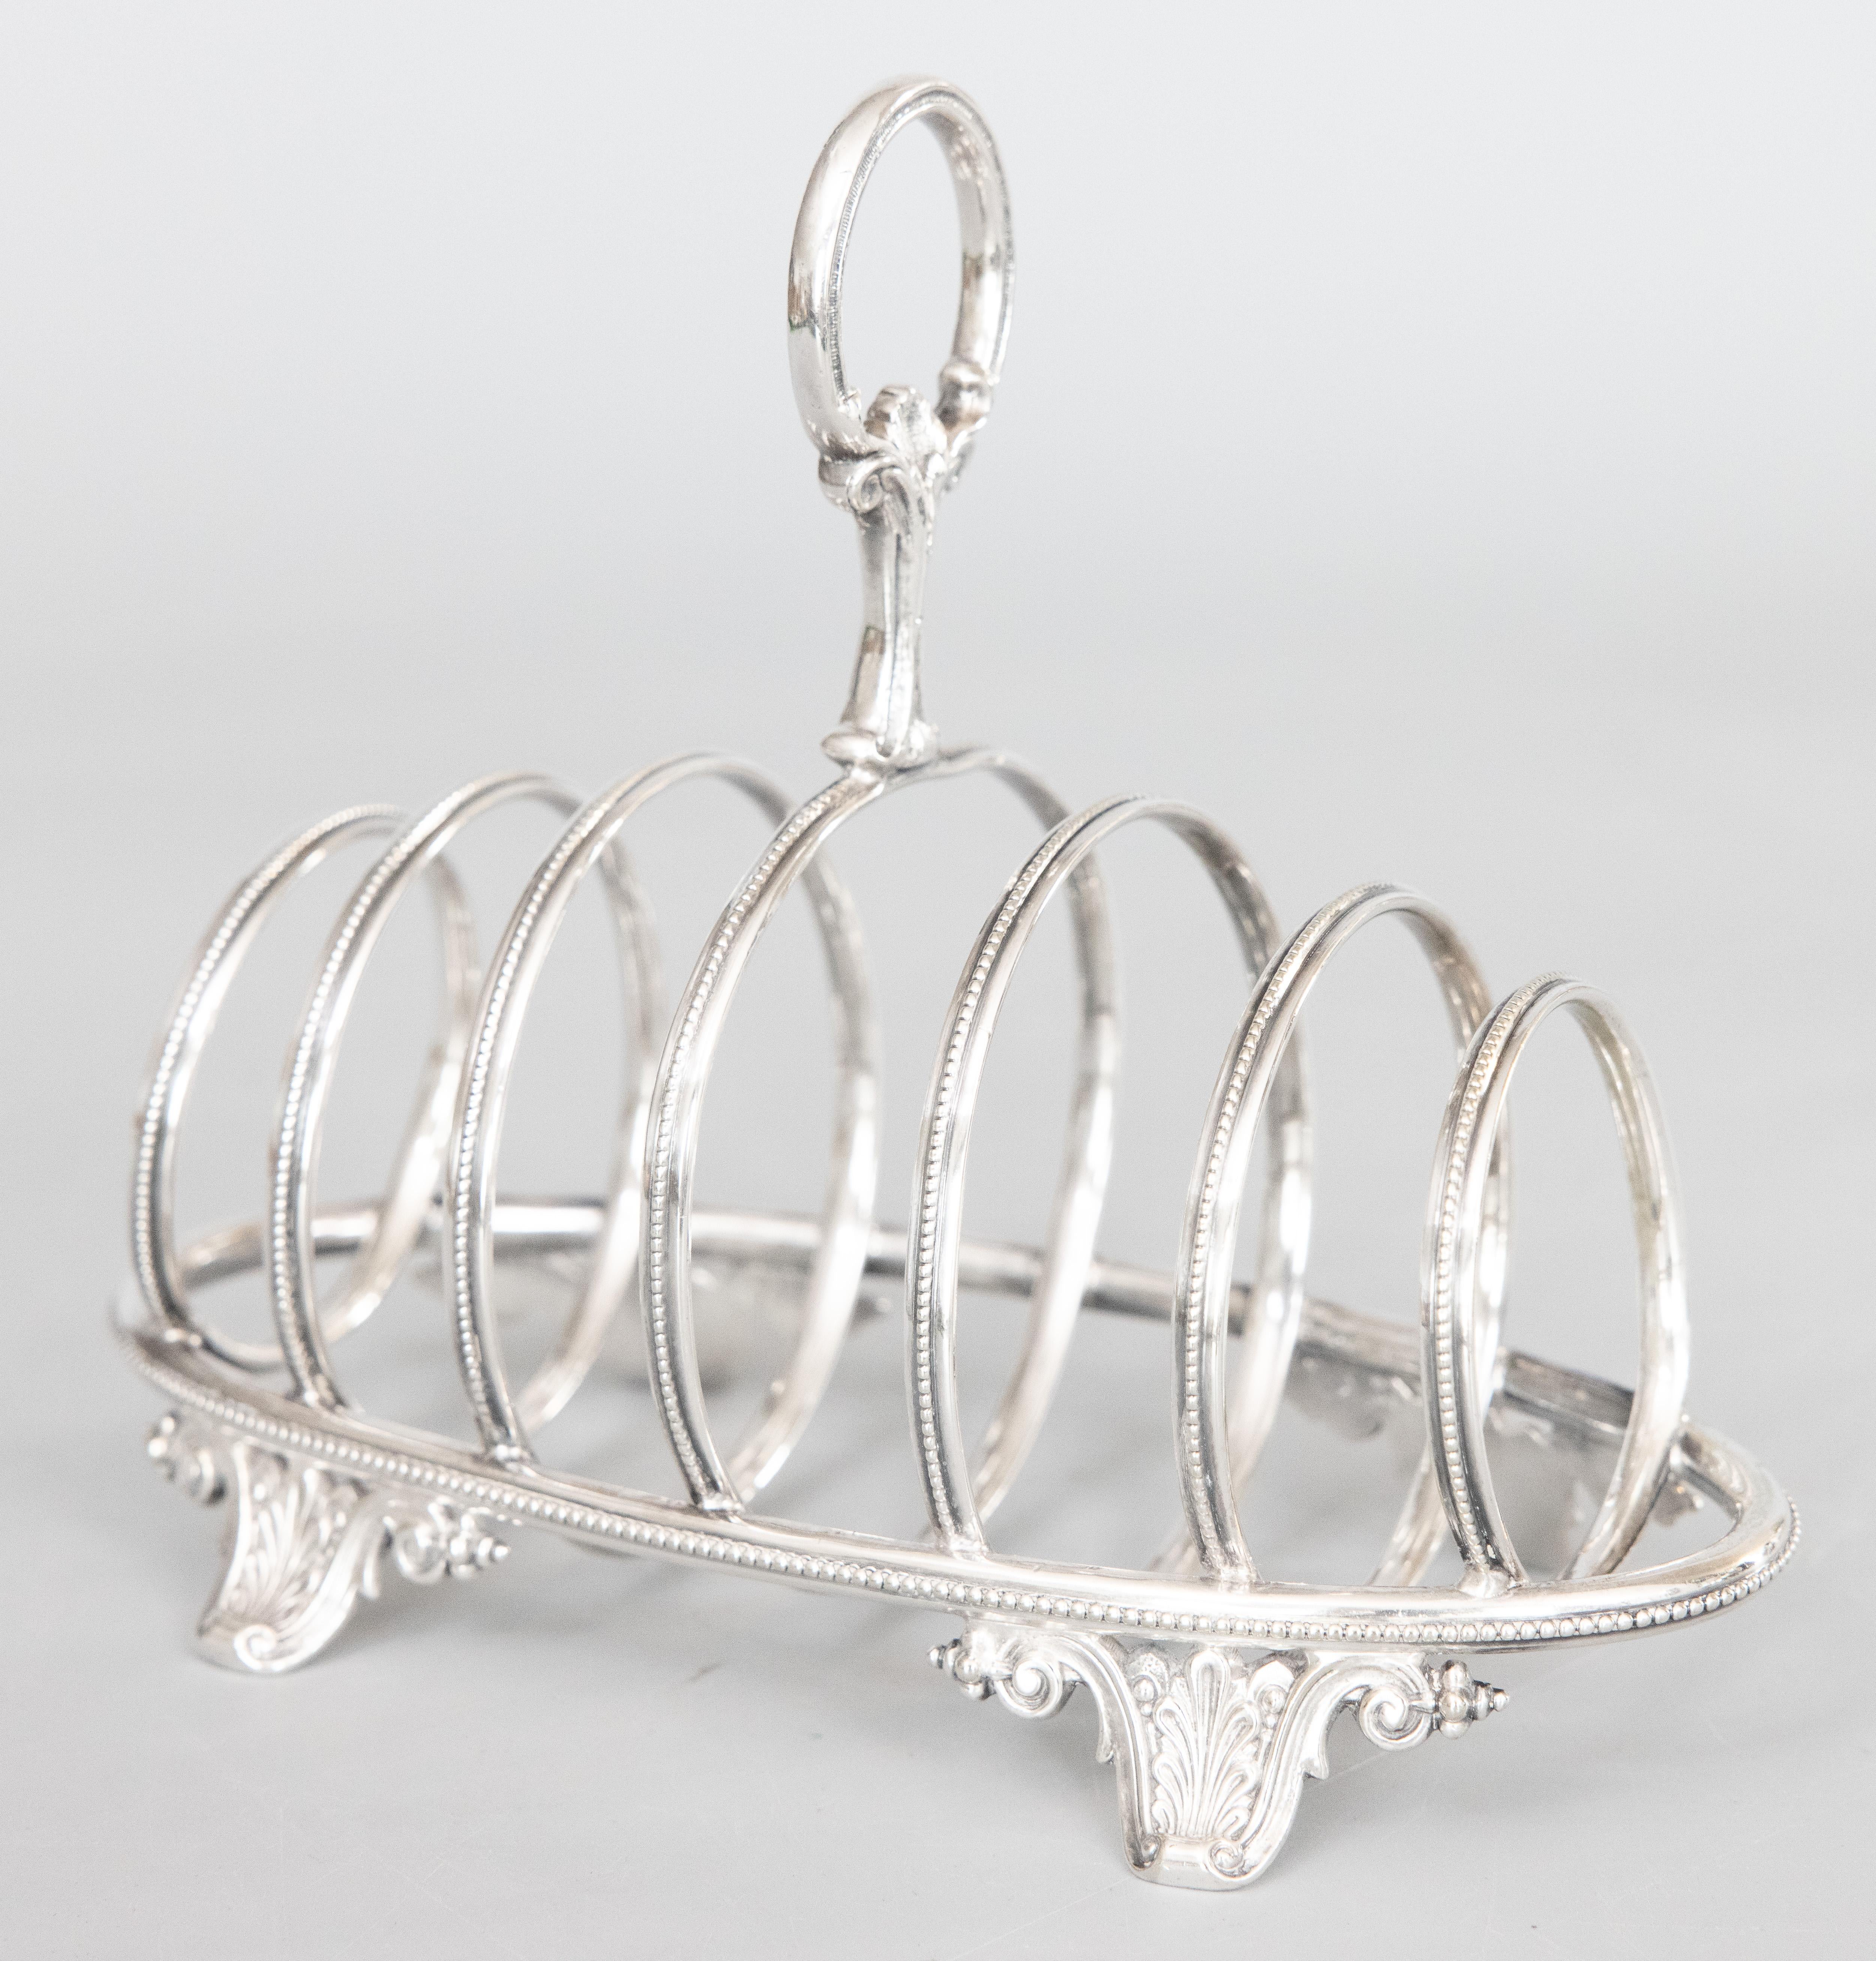 Antique Art Deco English Silver Plate Toast Rack, circa 1900 For Sale 5